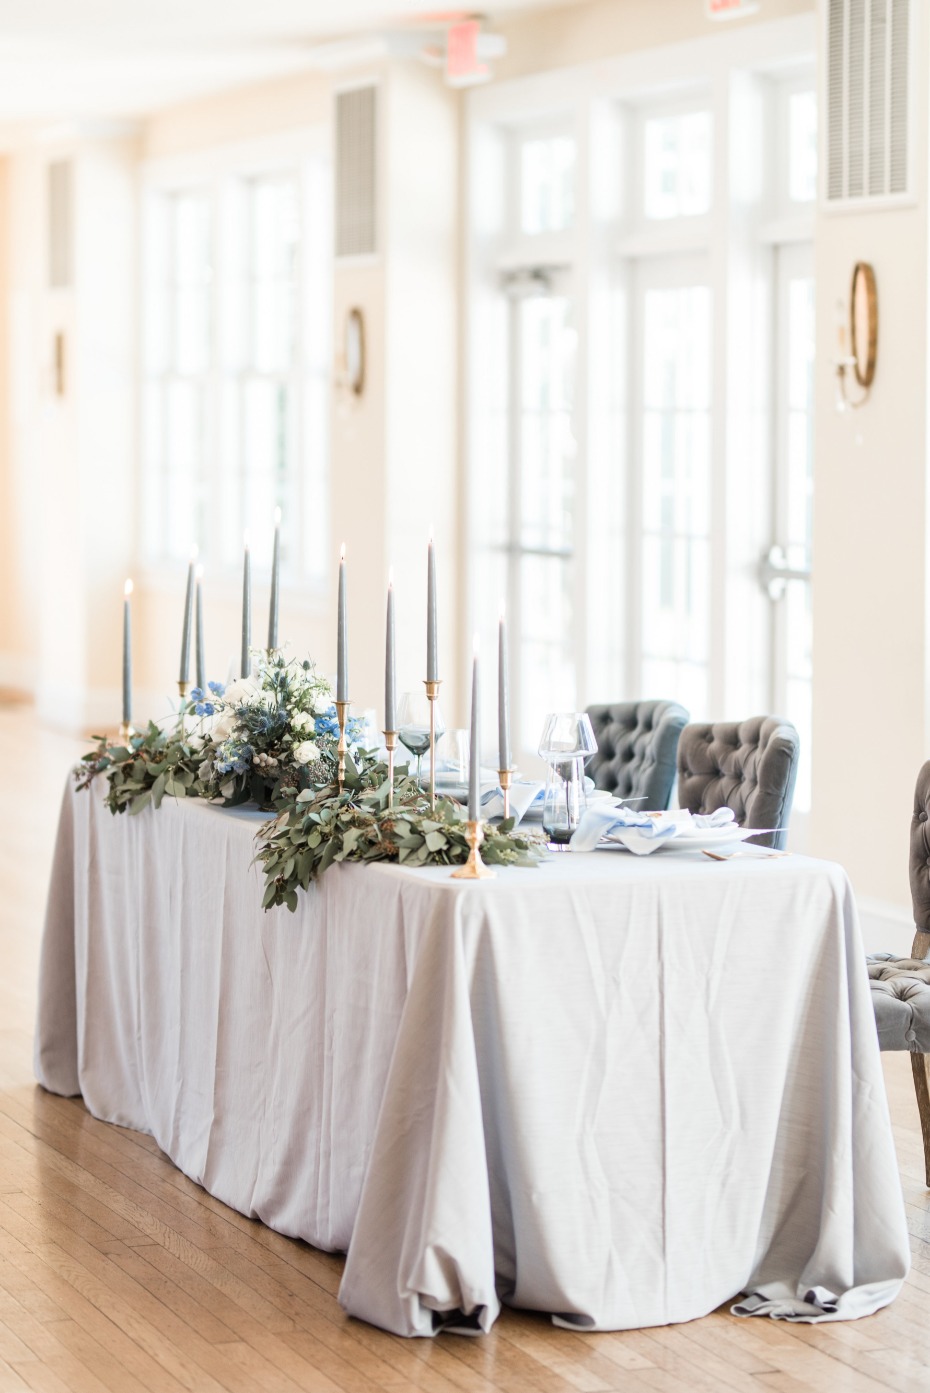 Muted blue sweetheart table